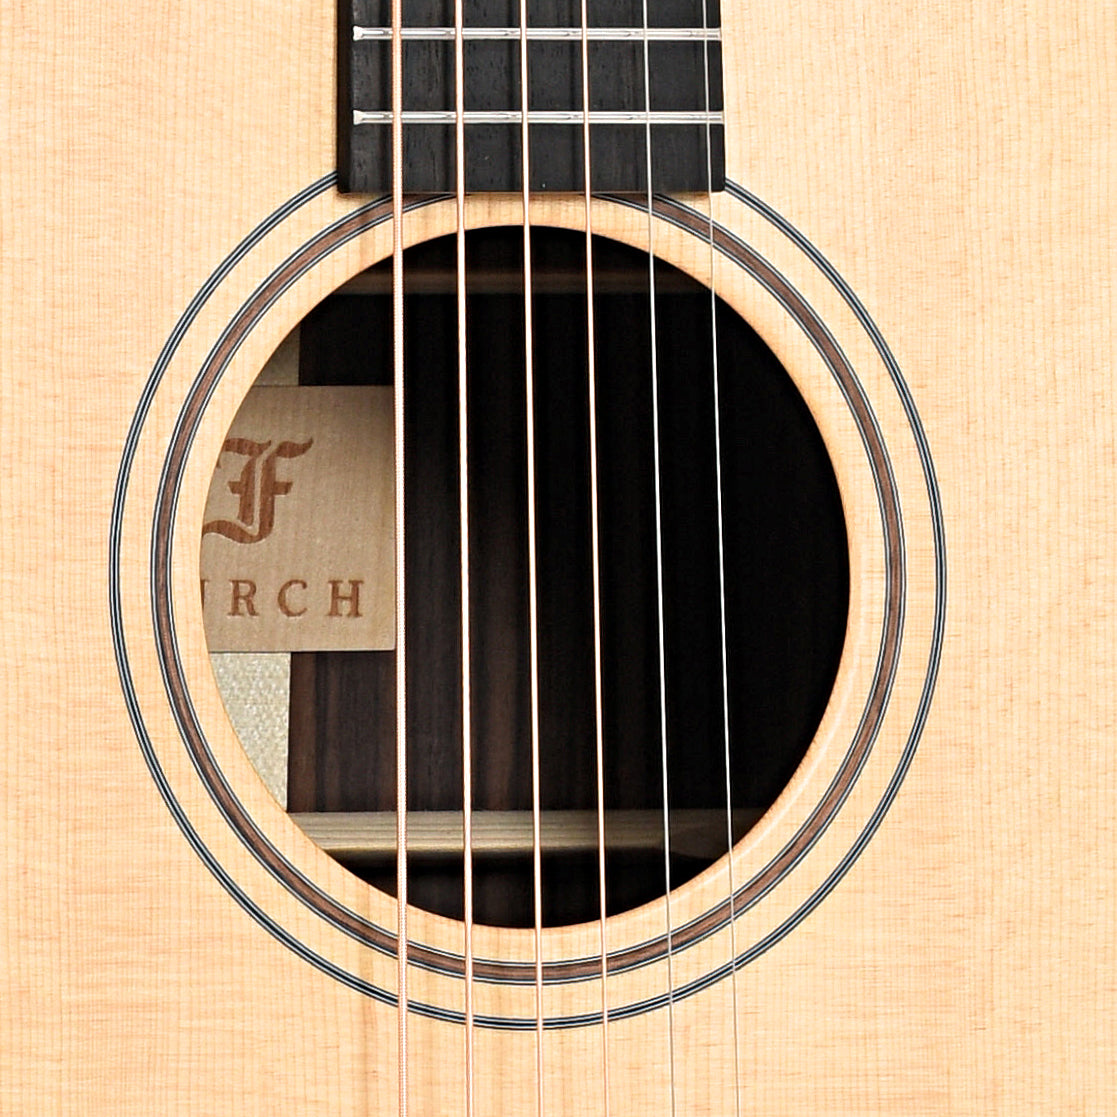 Sound hole of Furch Green D-SR Acoustic